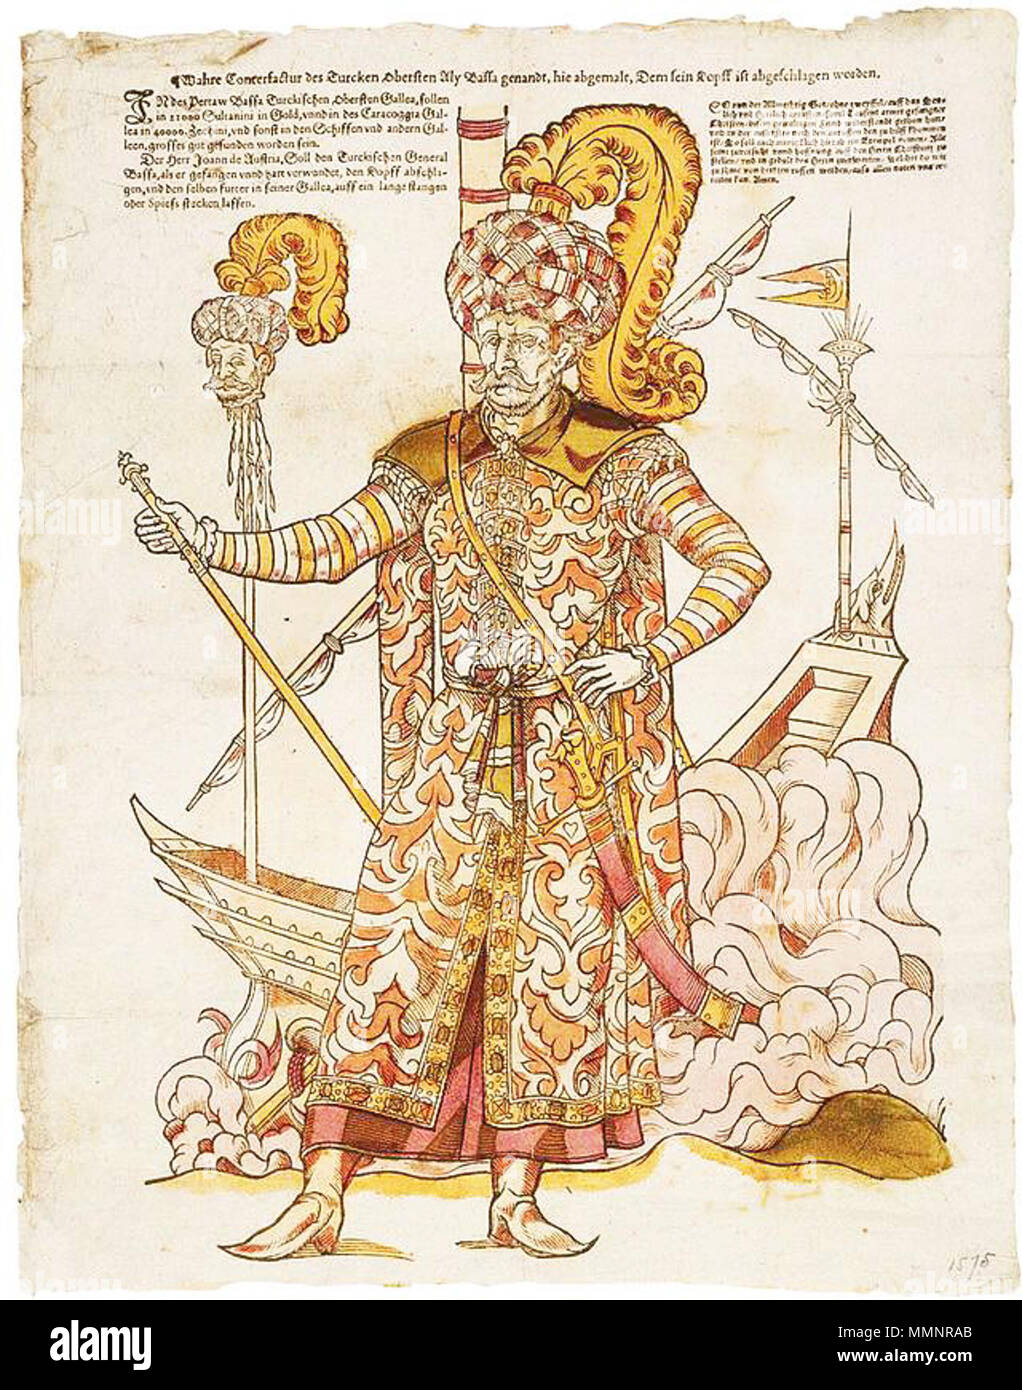 . (ostensibly) Müezzinzade Ali Pasha, the Turkish commander at the Battle of Lepanto. Anonymous German broadsheet, c. 1571. Woodcut with stencil and hand colouring on laid paper with letterpress. 'Müezzinzade Ali Pasha is shown full length, wearing a kaftan of costly woven, figured silks. His exotic clothes, turban and long feathery headdress denote his high rank. Although he is shown alive, in the background is a detail of his head on the end of a pole. Behind Ali Pasha is the Turkish (Ottoman) flagship on which he was wounded and subsequently beheaded.'  . This file is lacking author informa Stock Photo